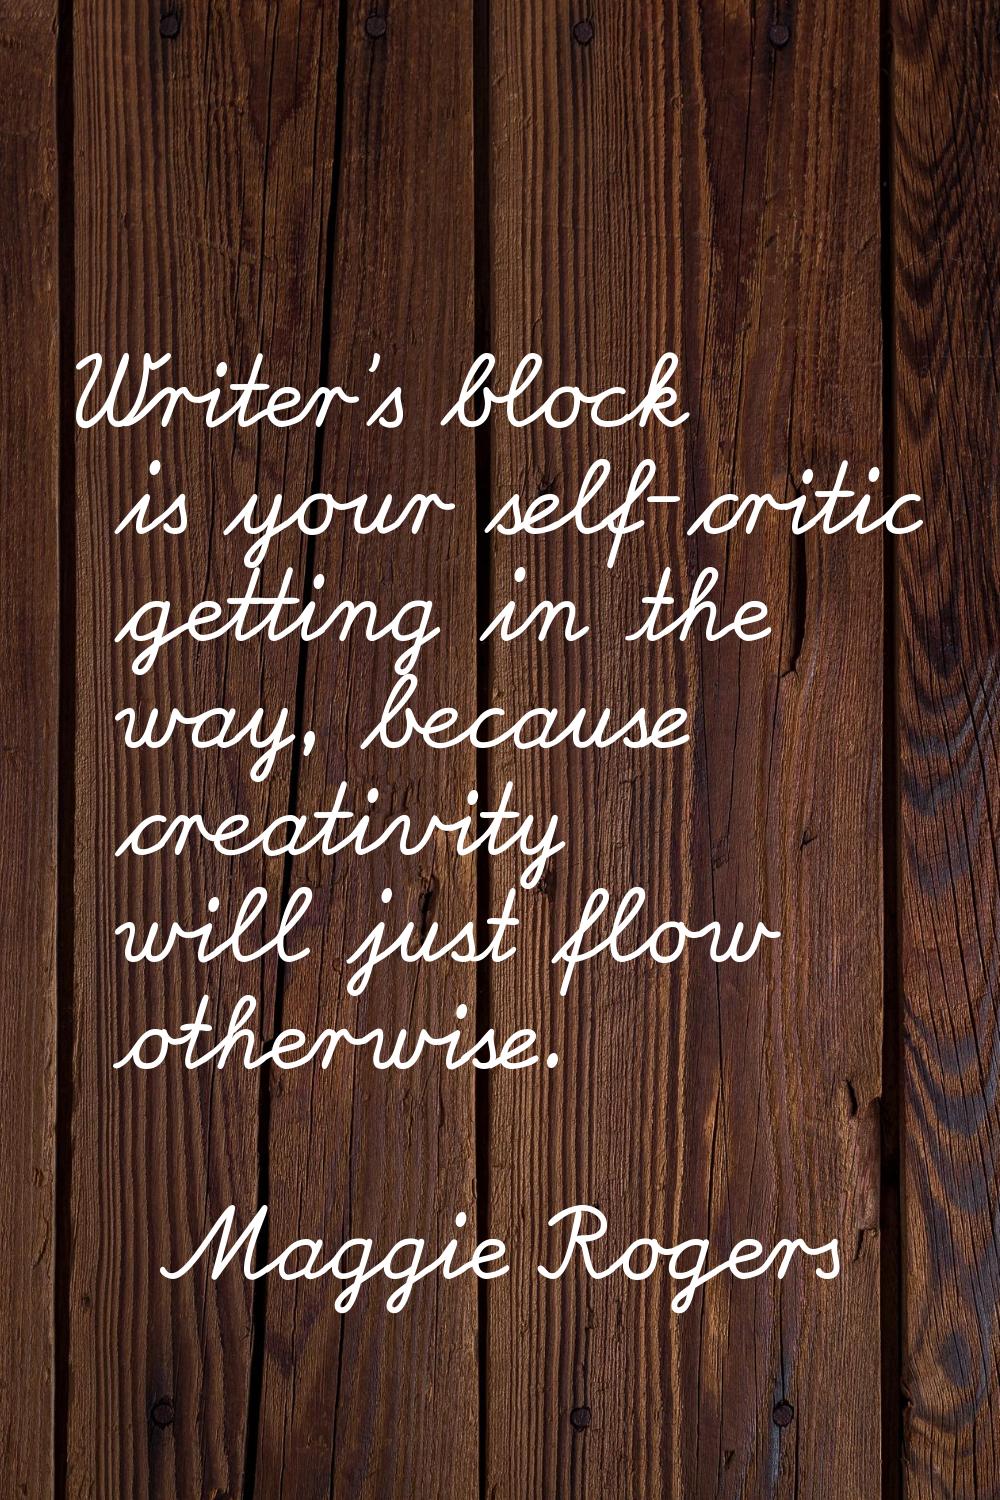 Writer's block is your self-critic getting in the way, because creativity will just flow otherwise.